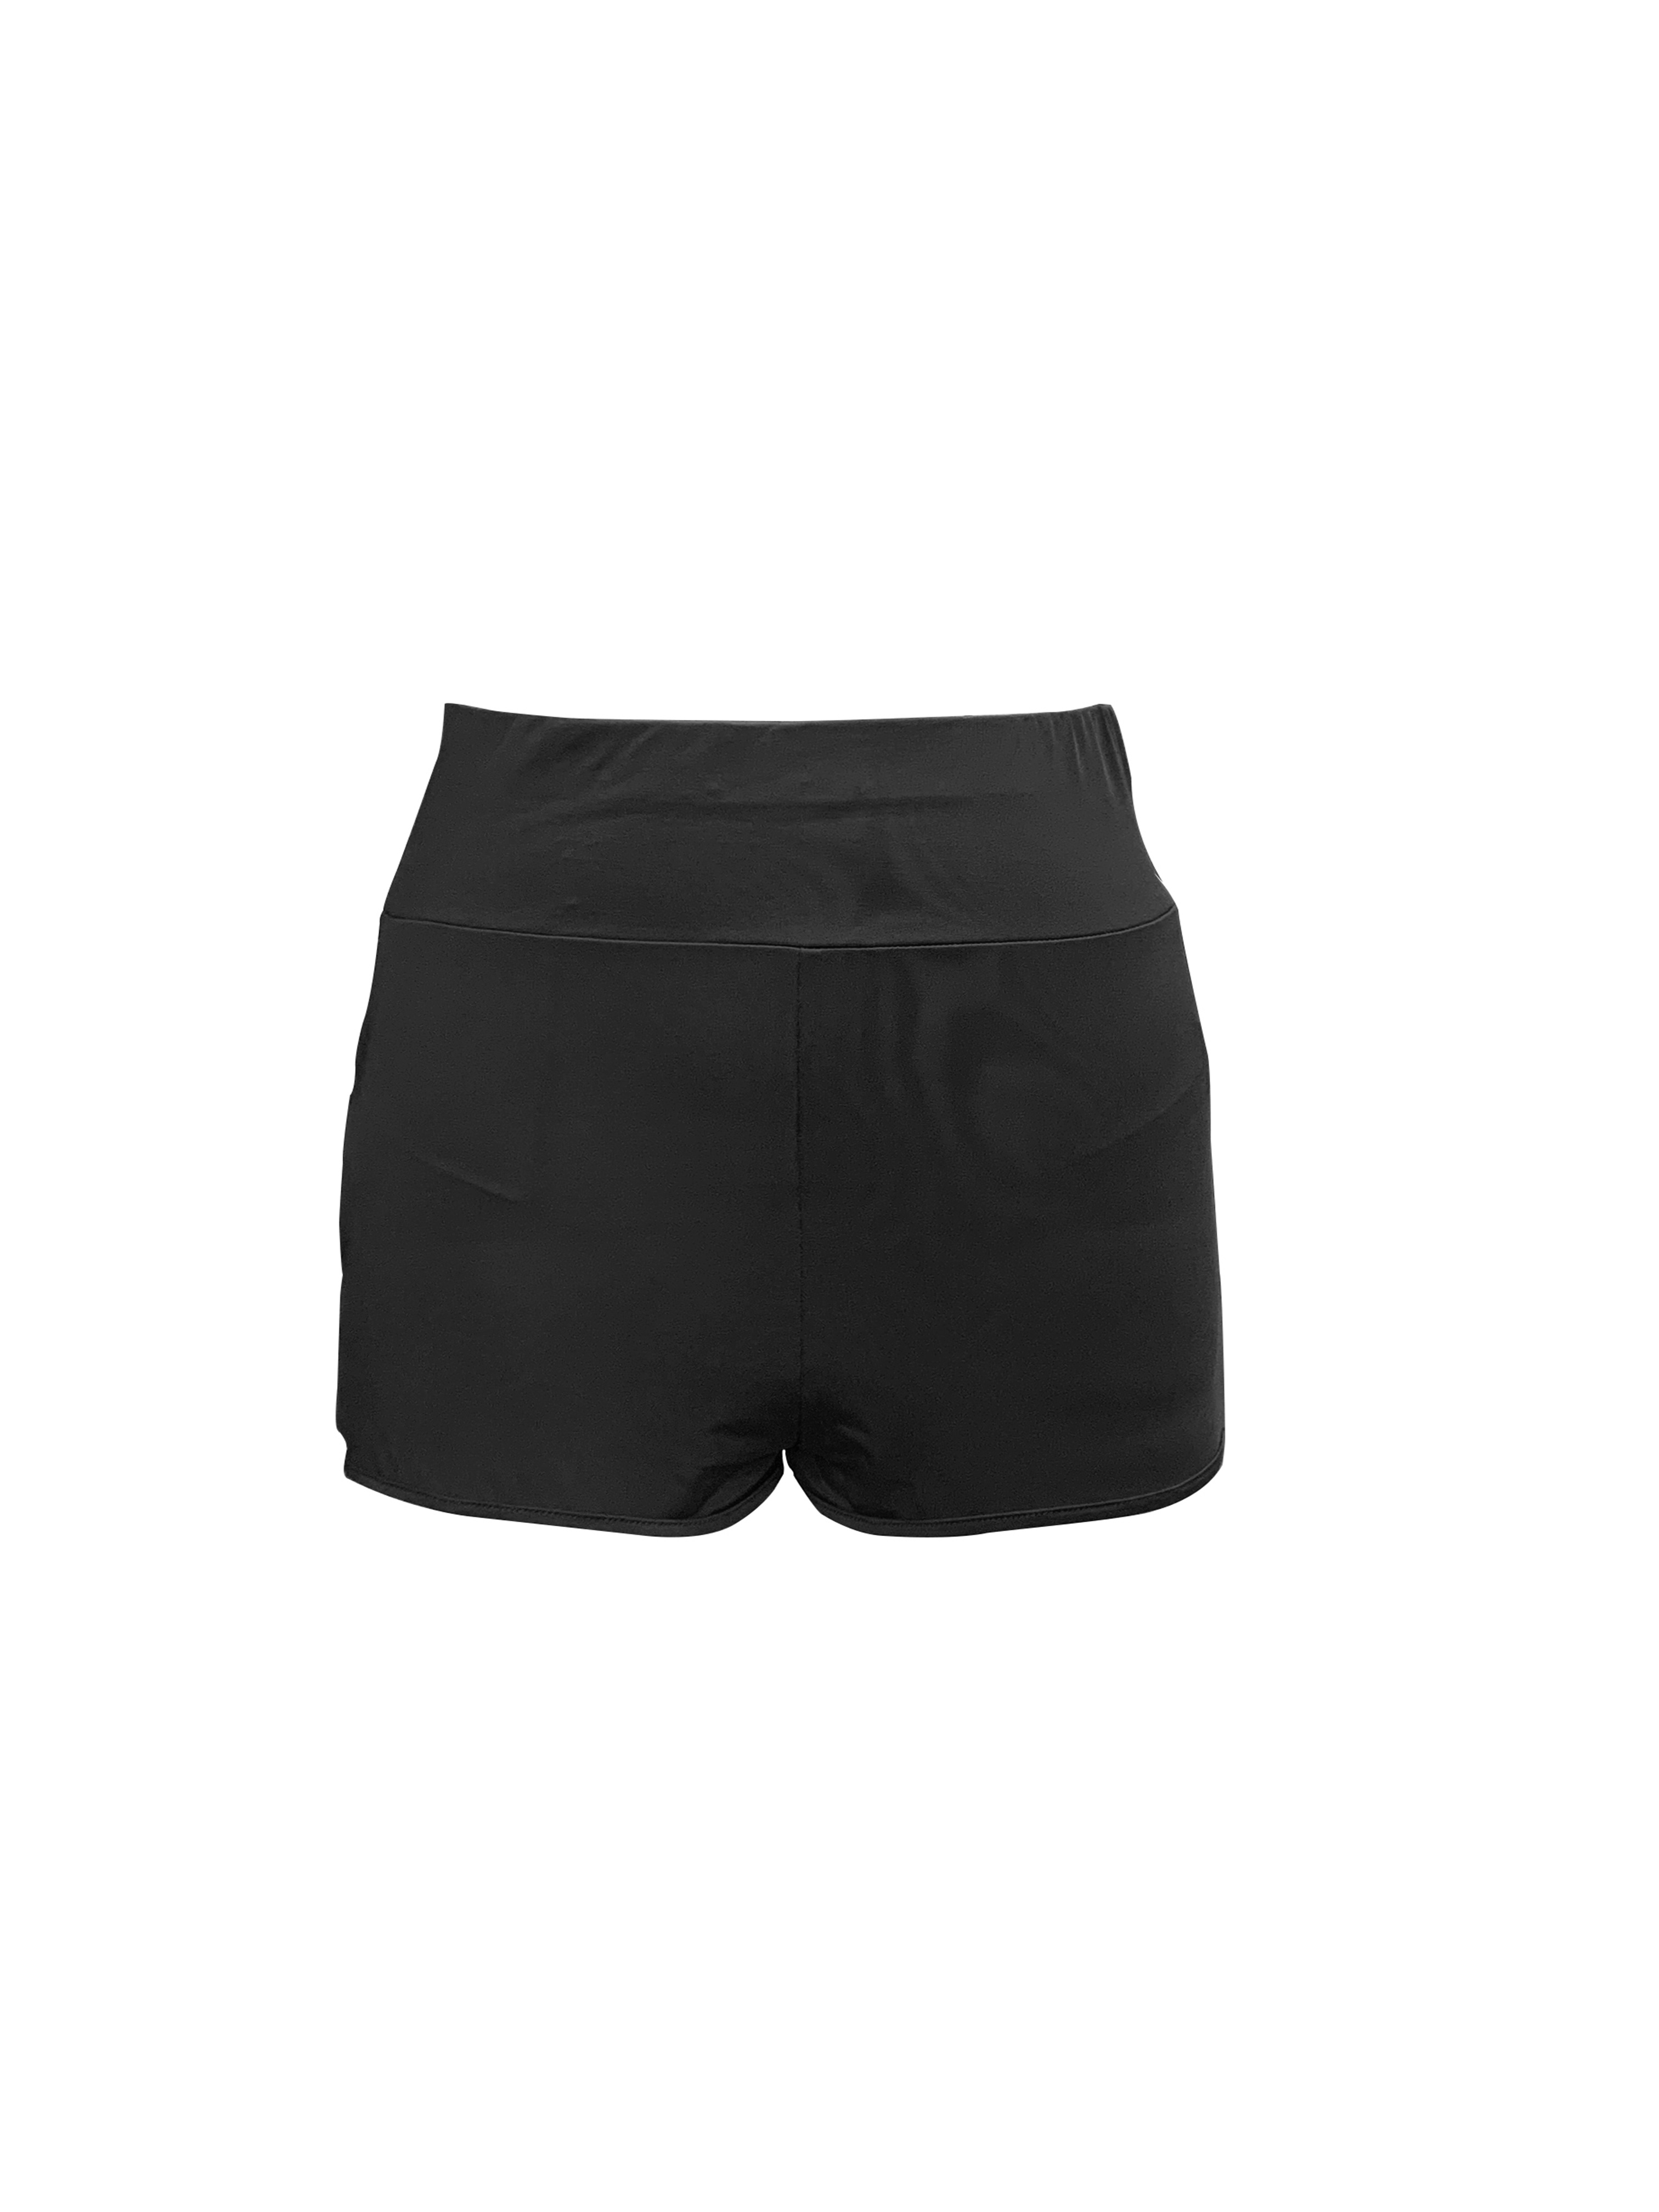 Supply New Sports Style Short Shorts Yoga Slimming Loose Fitting